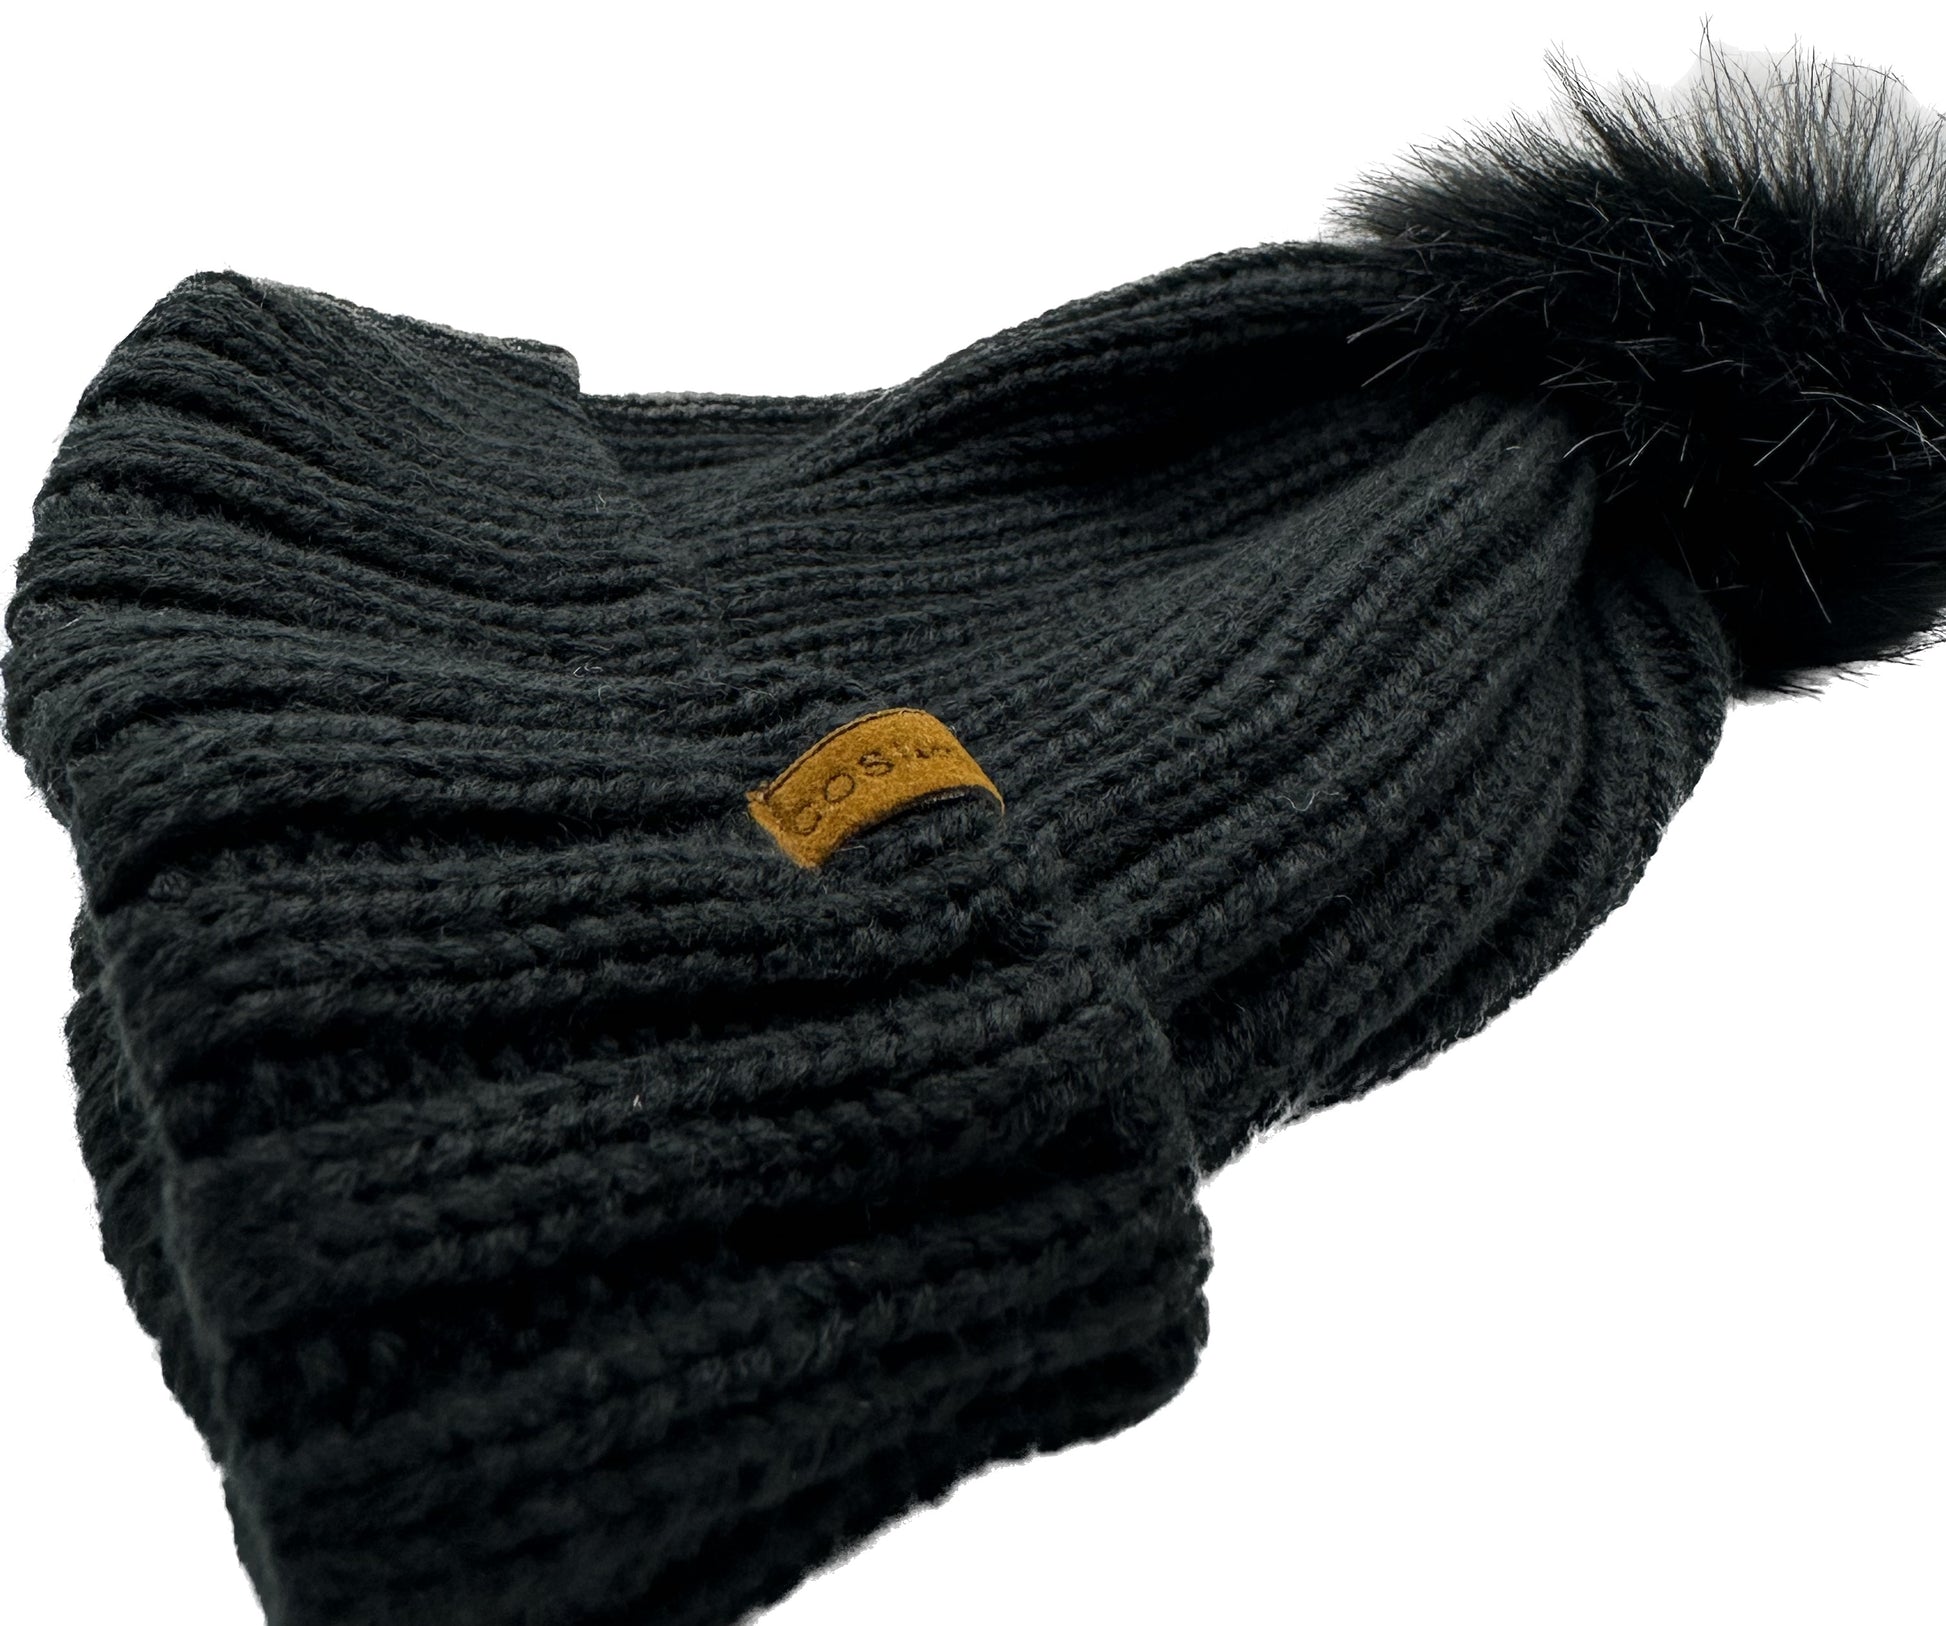 THE KNIT BEANIE IN BLACK - COSI & co.